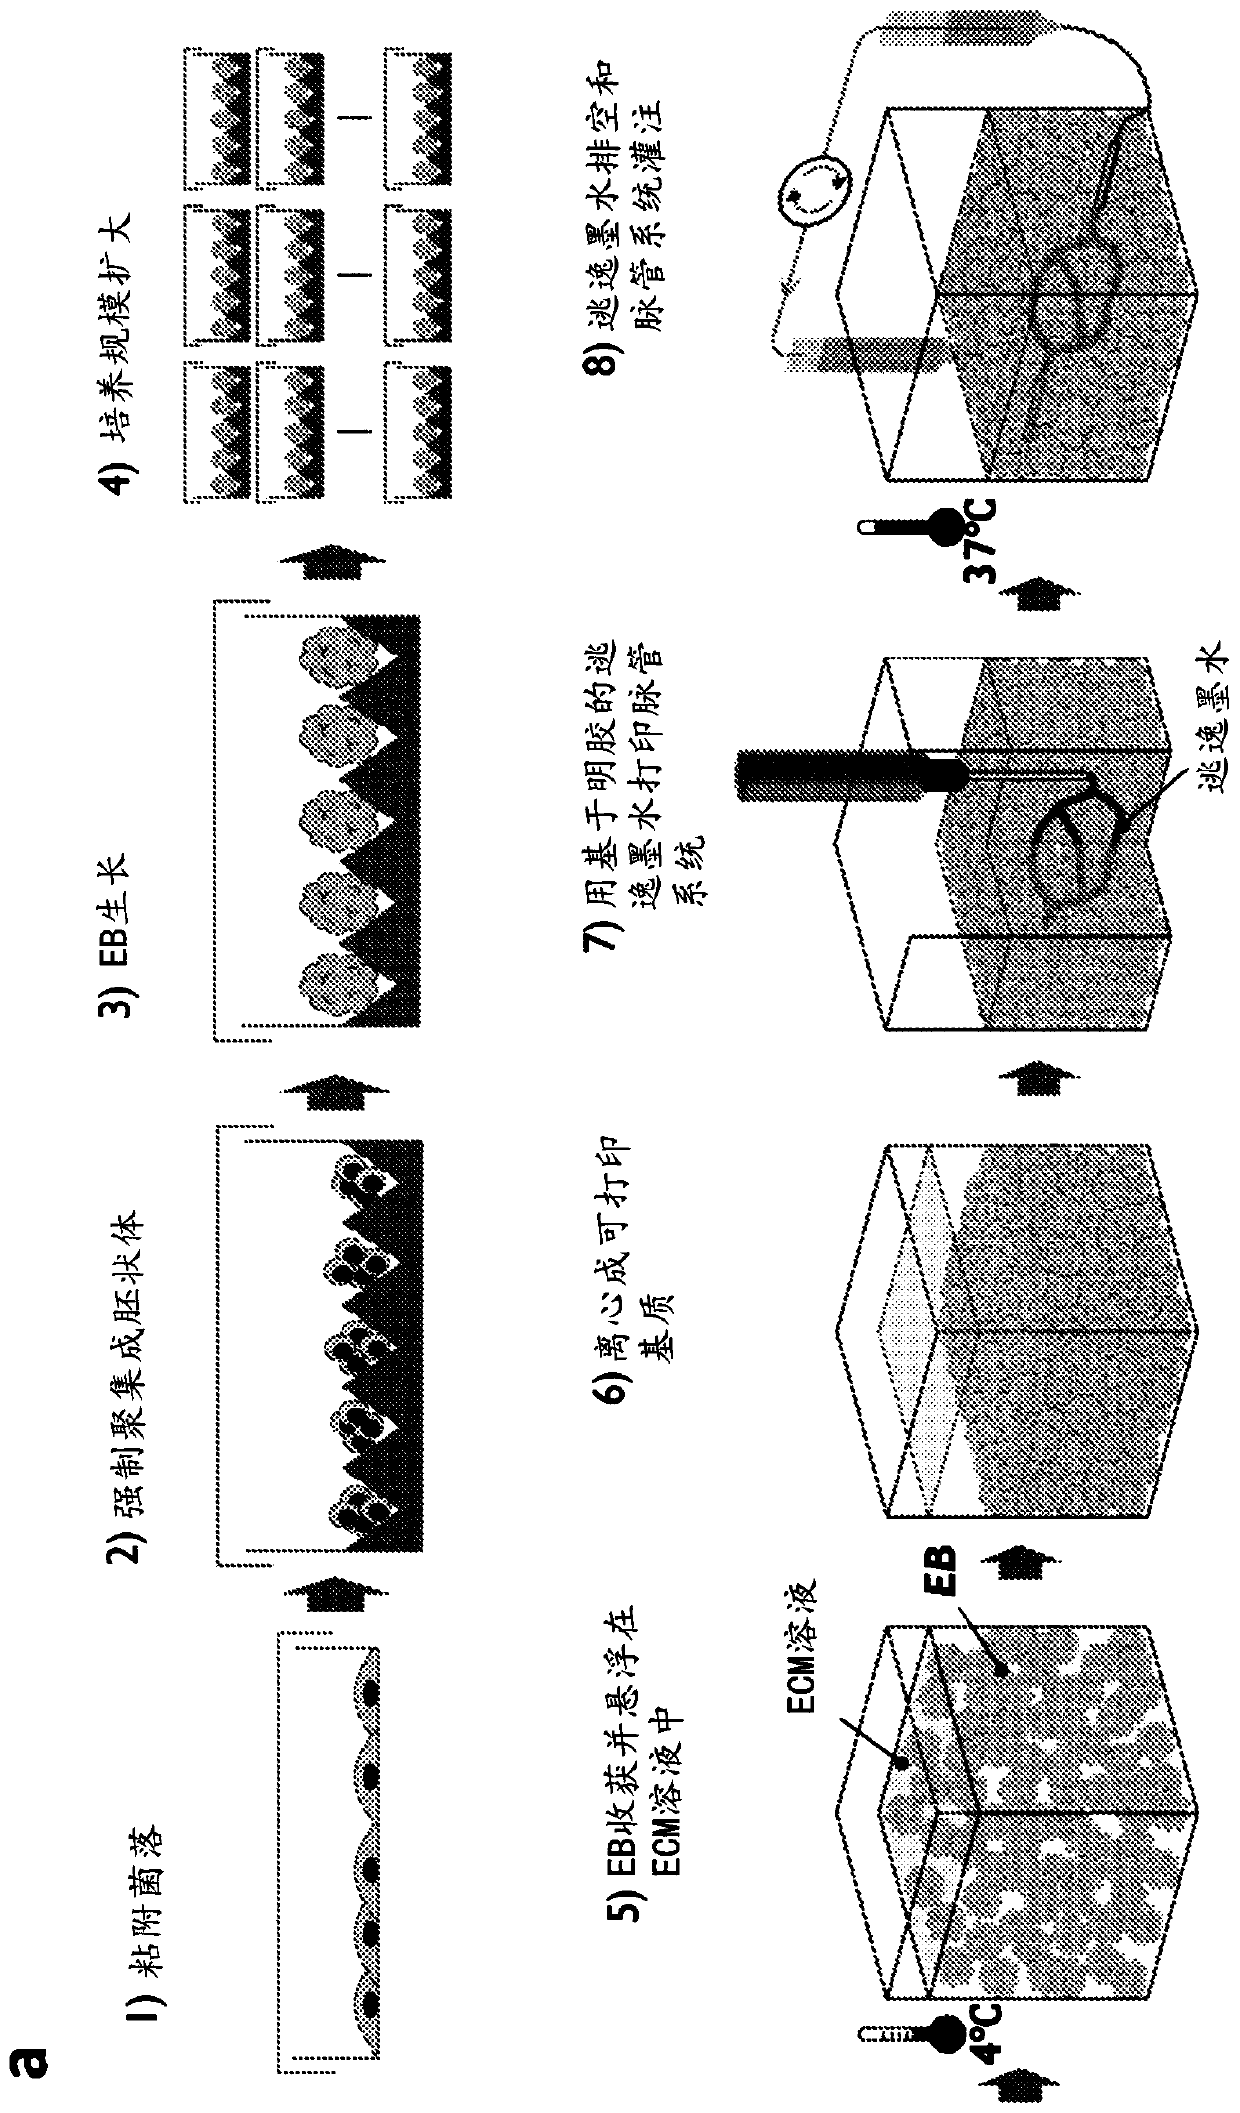 Tissue construct, methods of producing and using the same